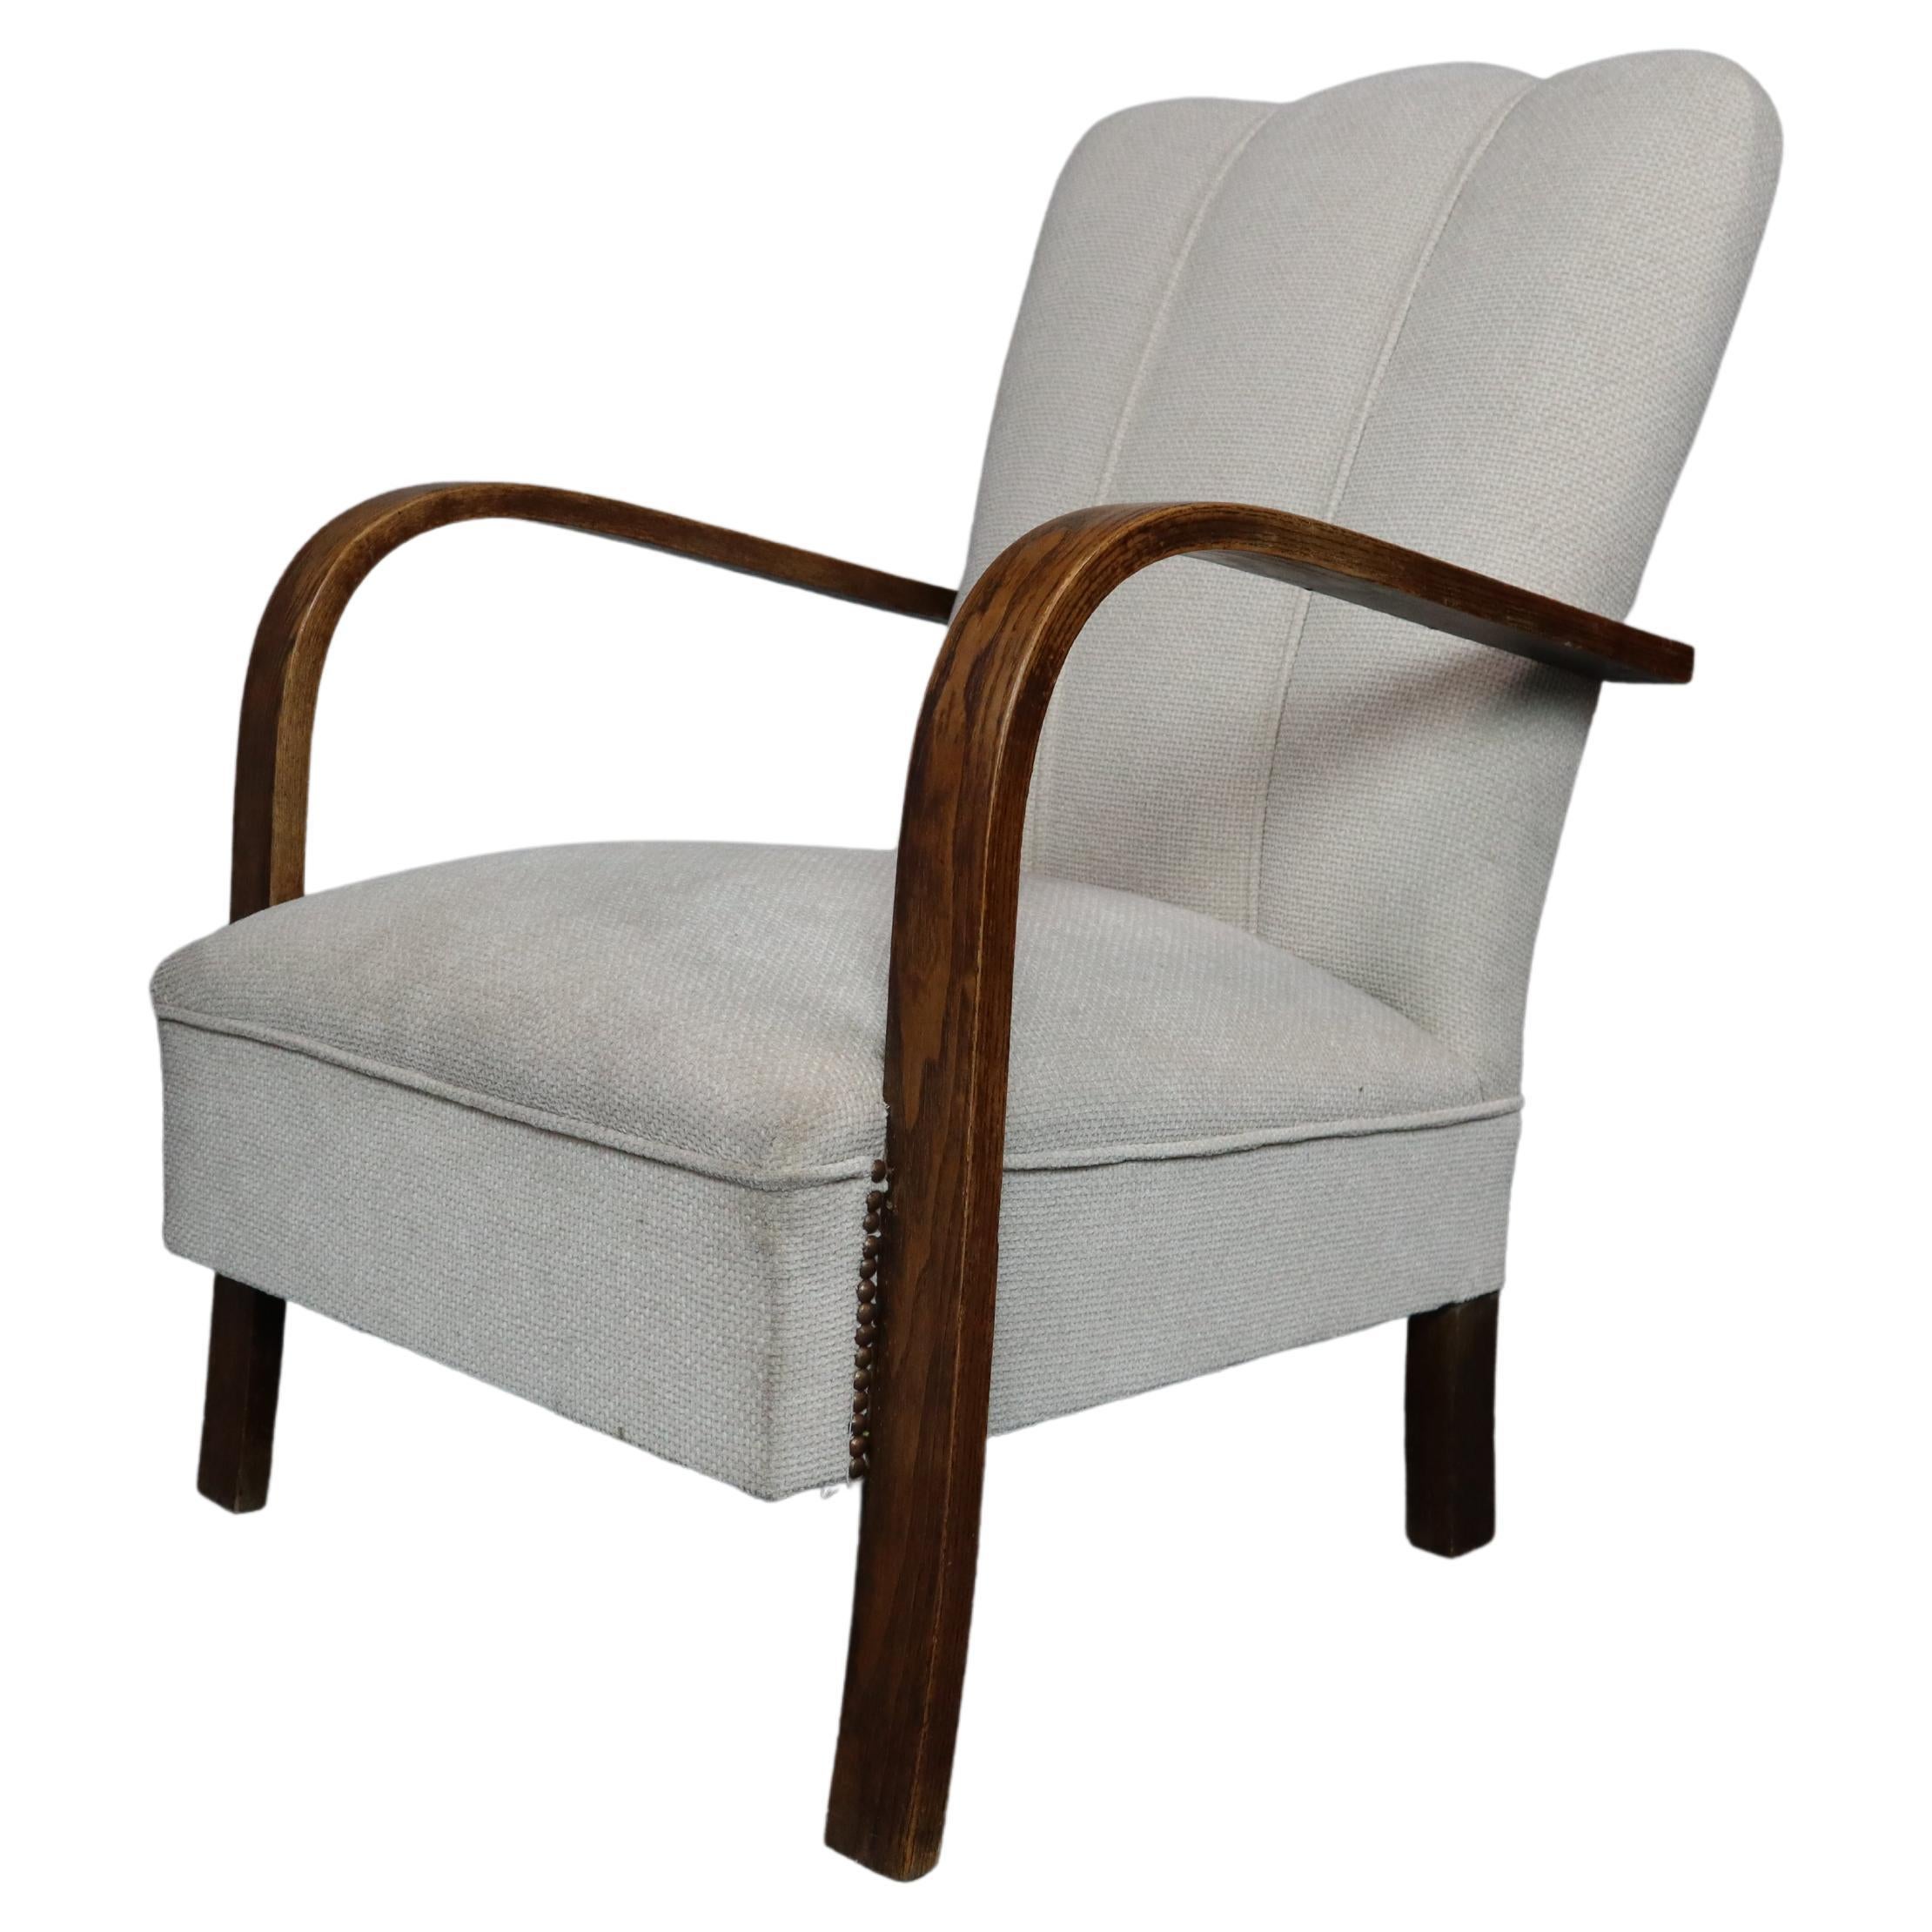 Early 20th Century Art-Deco Armchair, Oak and Fabric For Sale